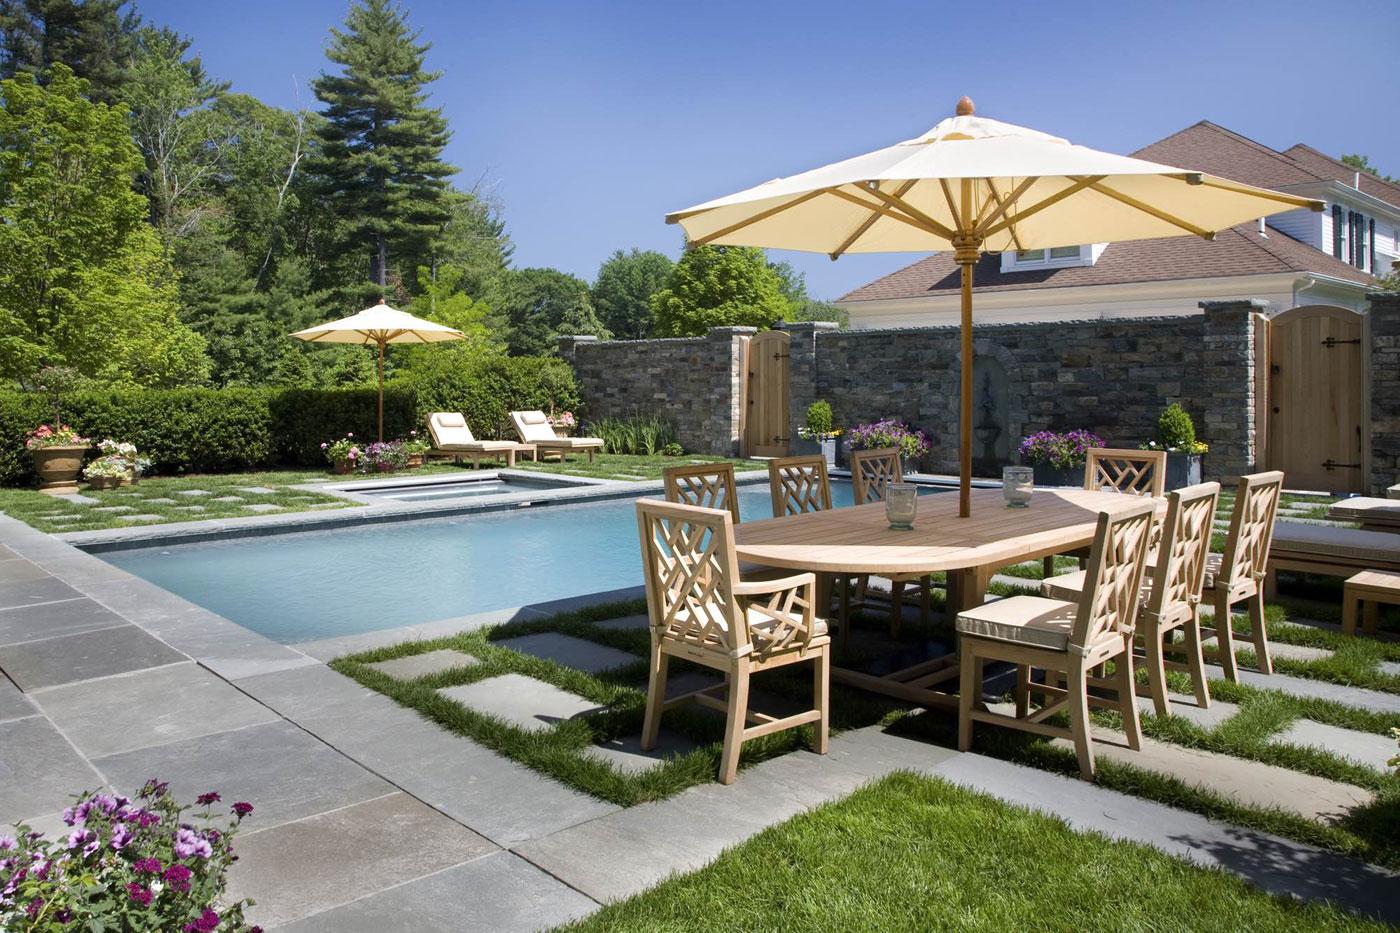 Pool with outdoor dining table and lounge chairs